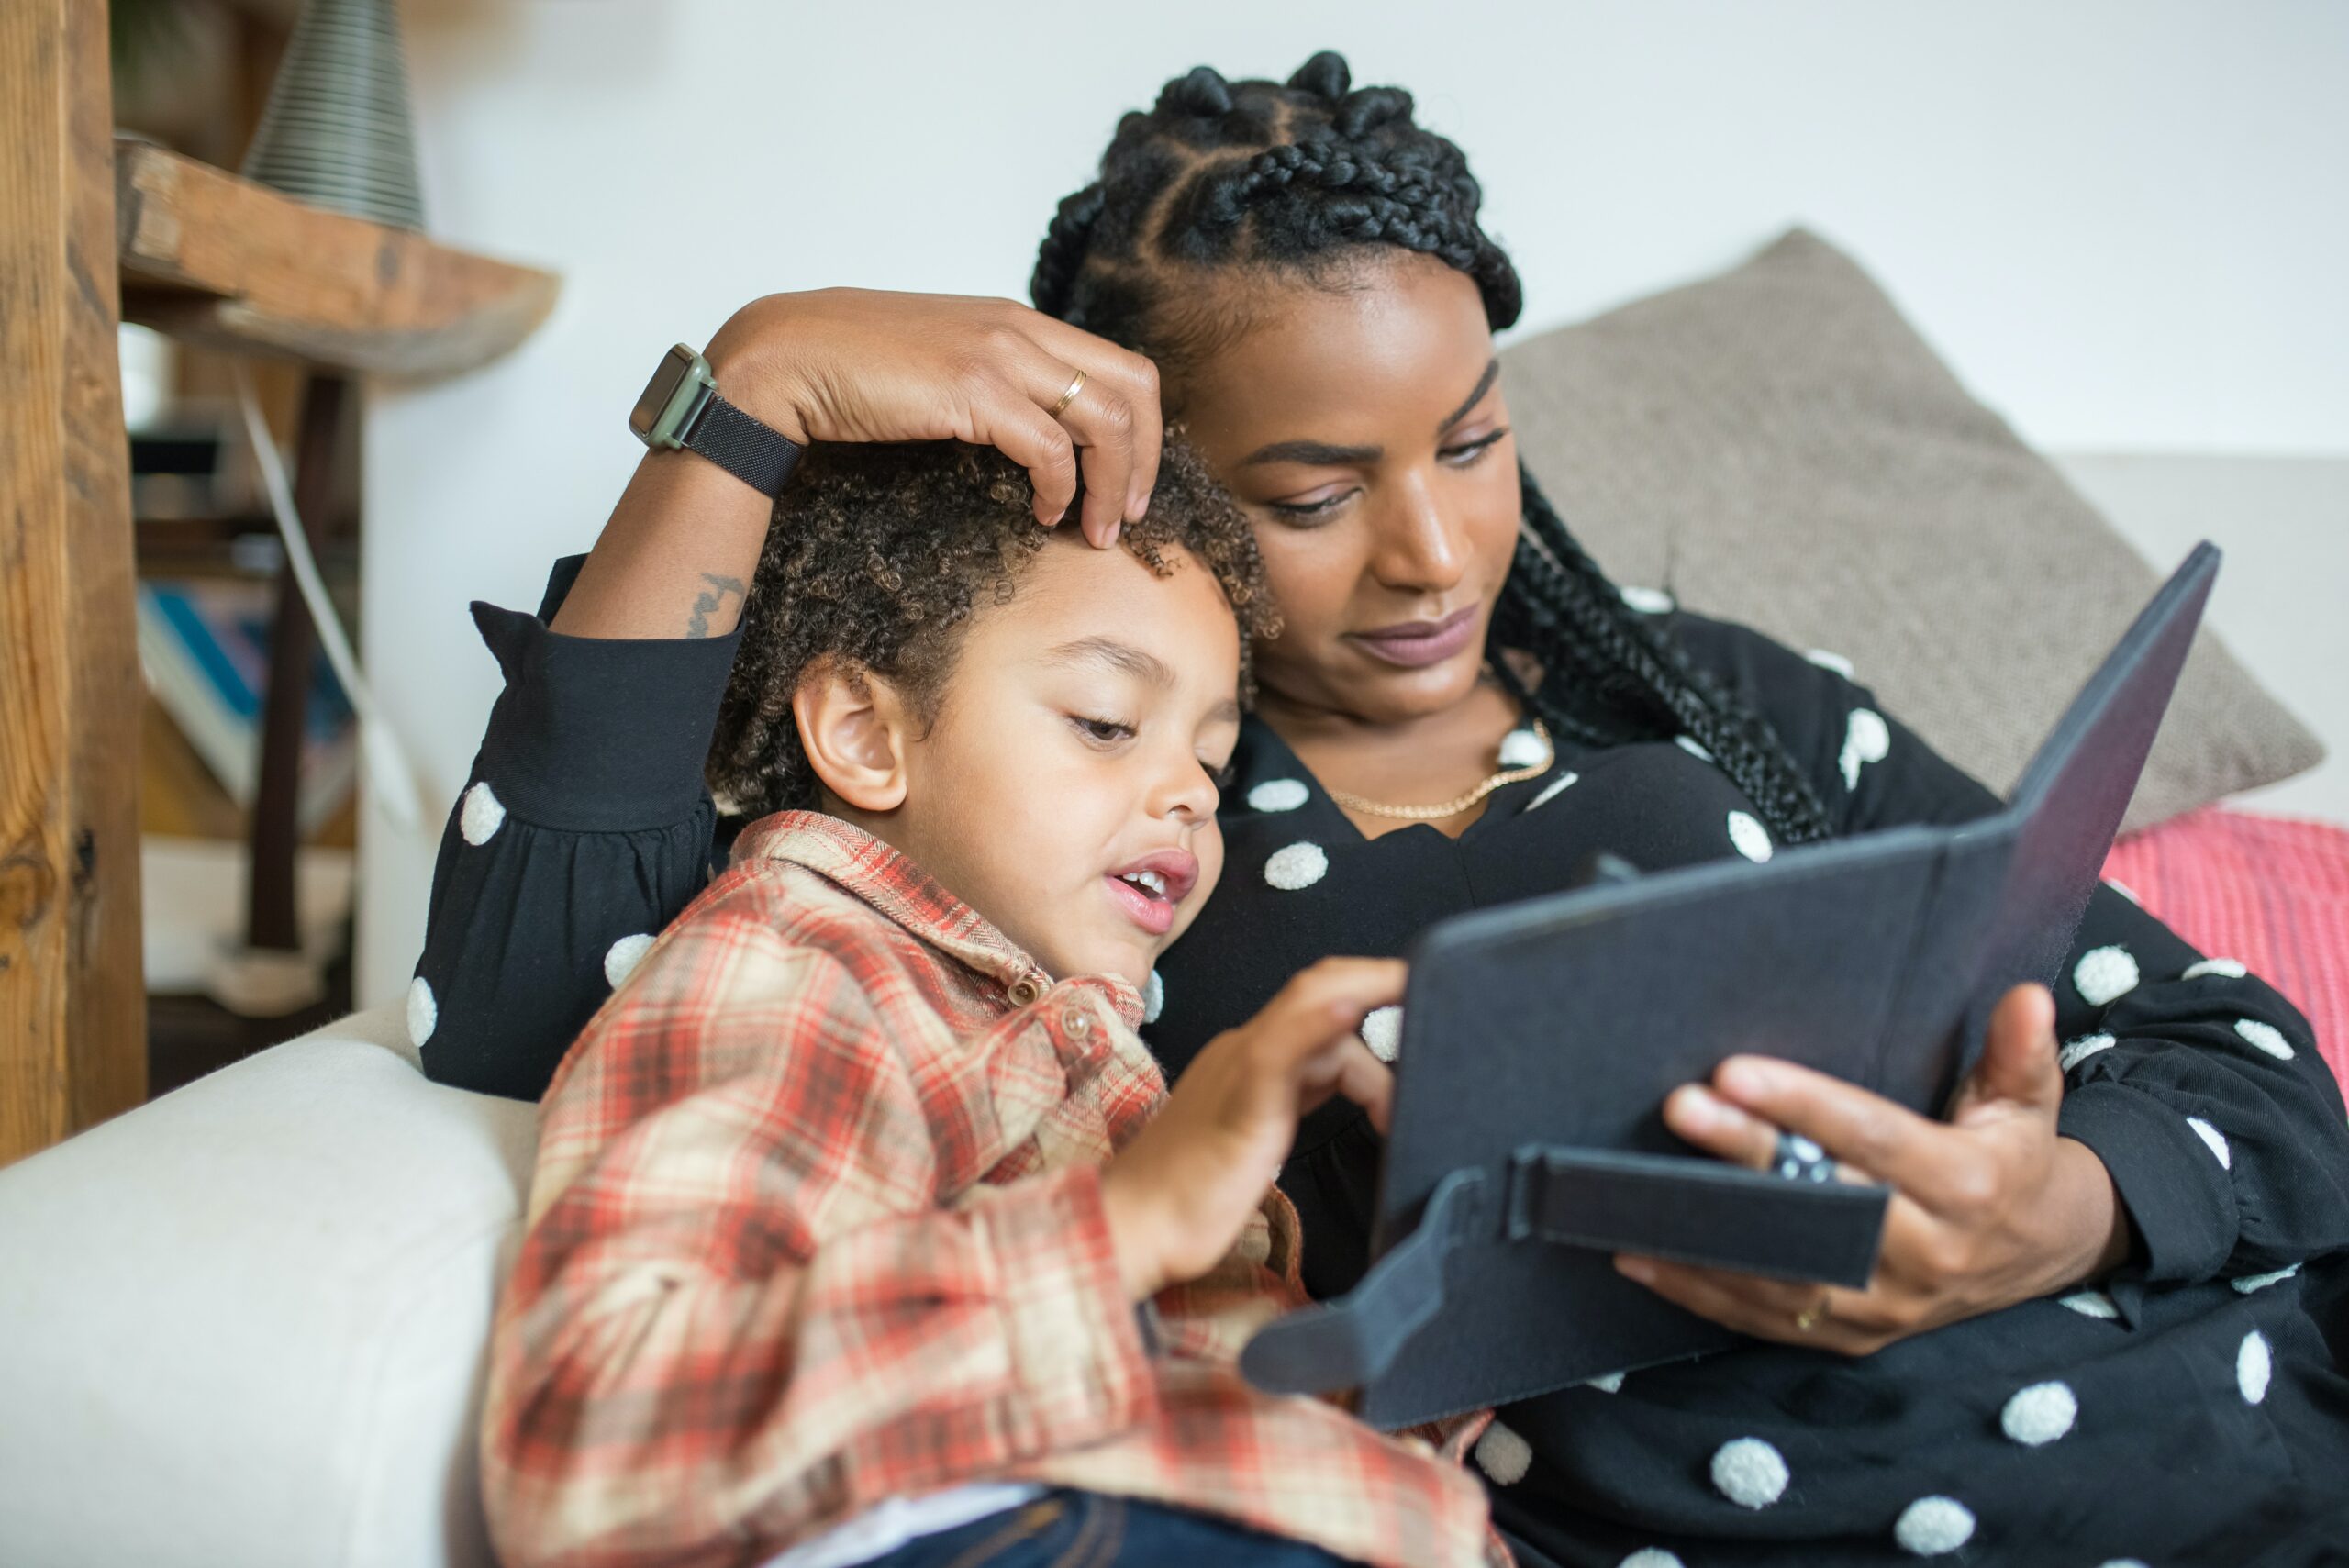 Mom and son reading on a tablet by Kampus production via Pexels